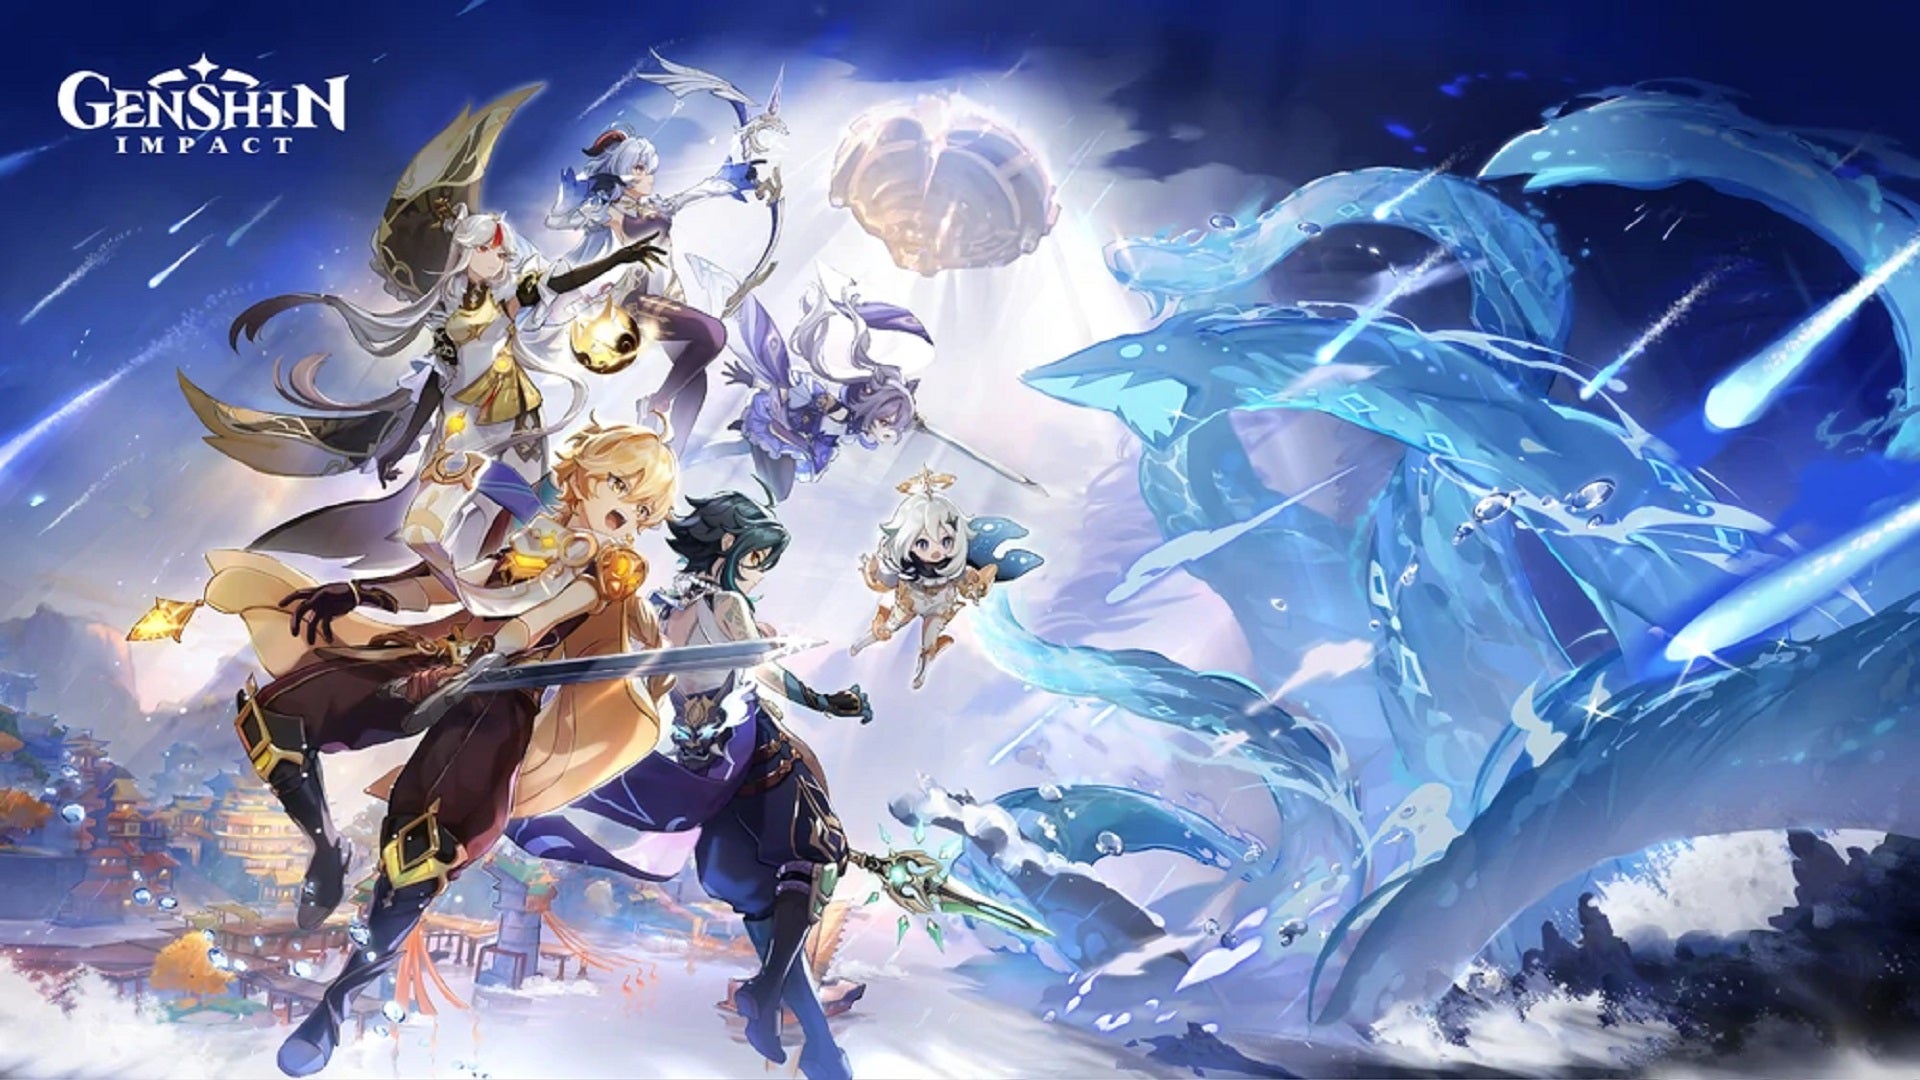 A team of characters battling a water hydra in Genshin Impact.